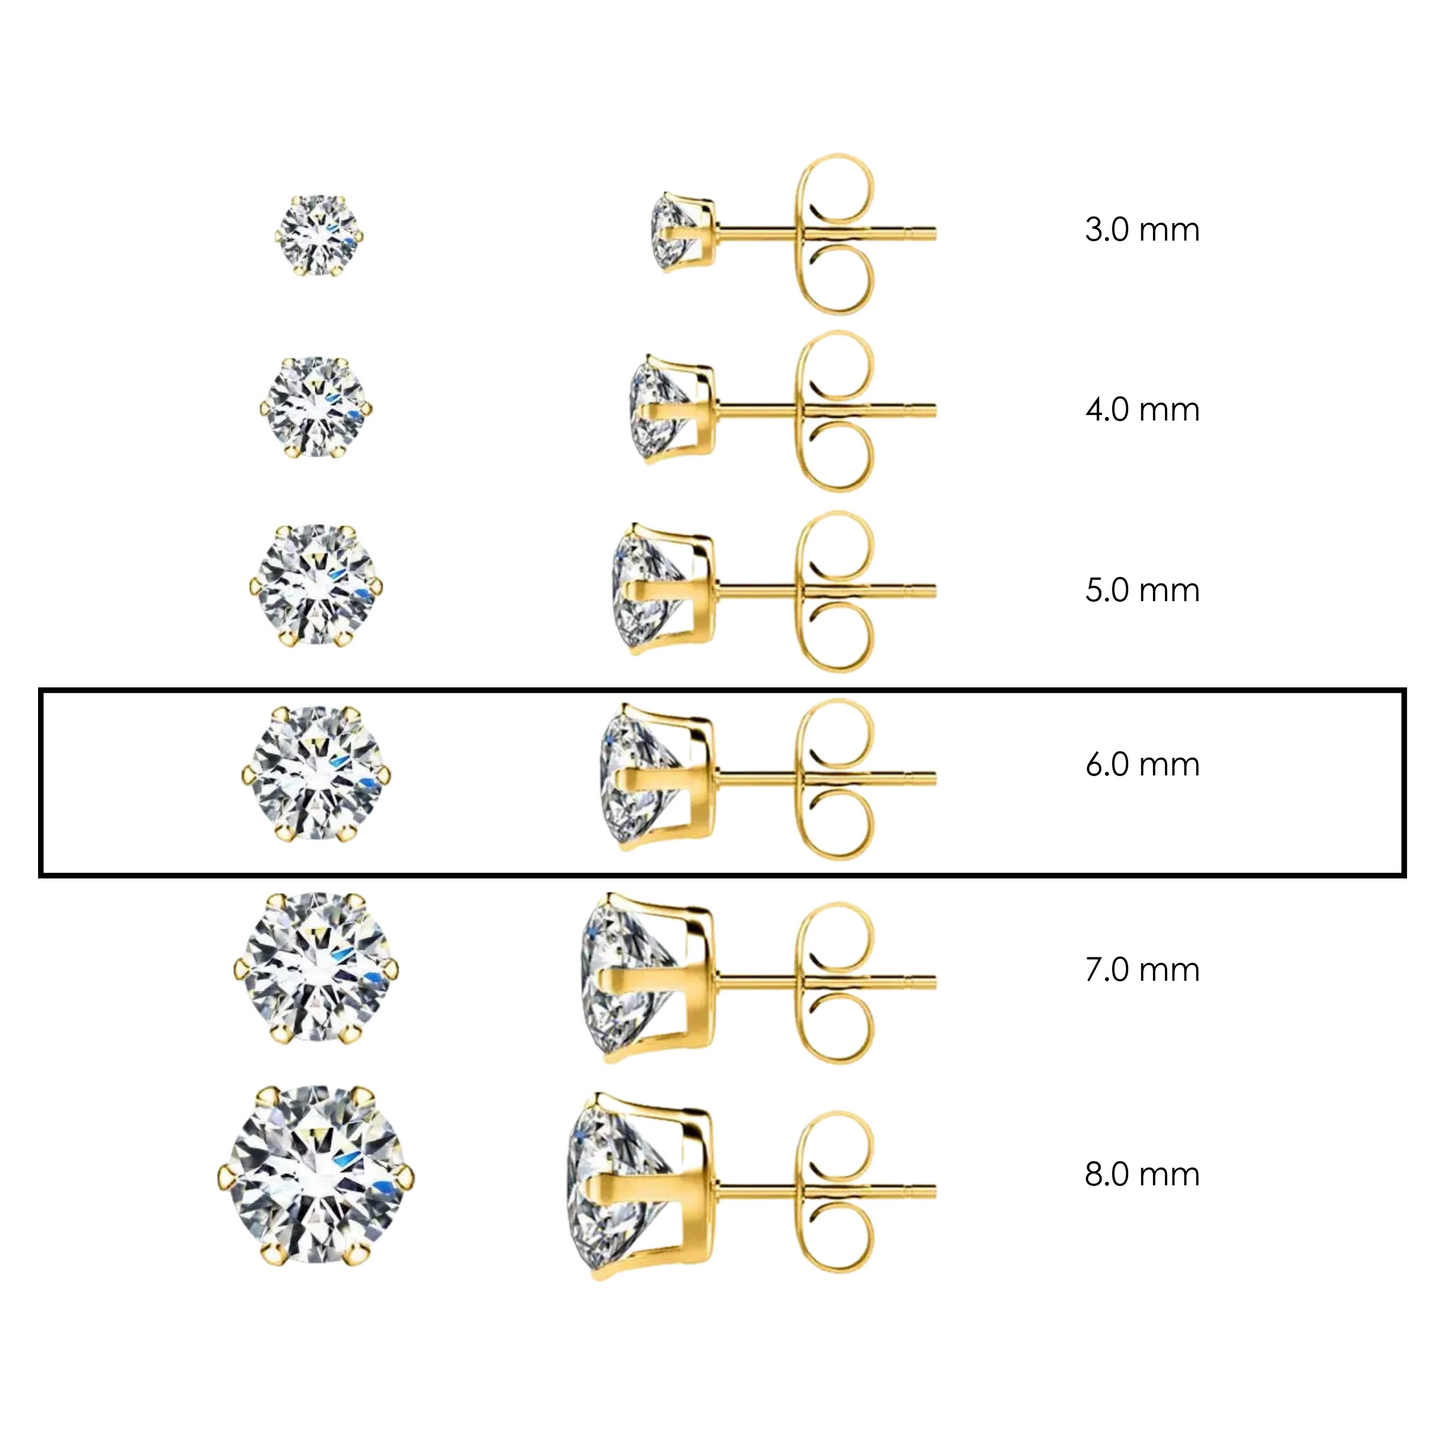 6.0mm Clear Round CZ Stud Earrings